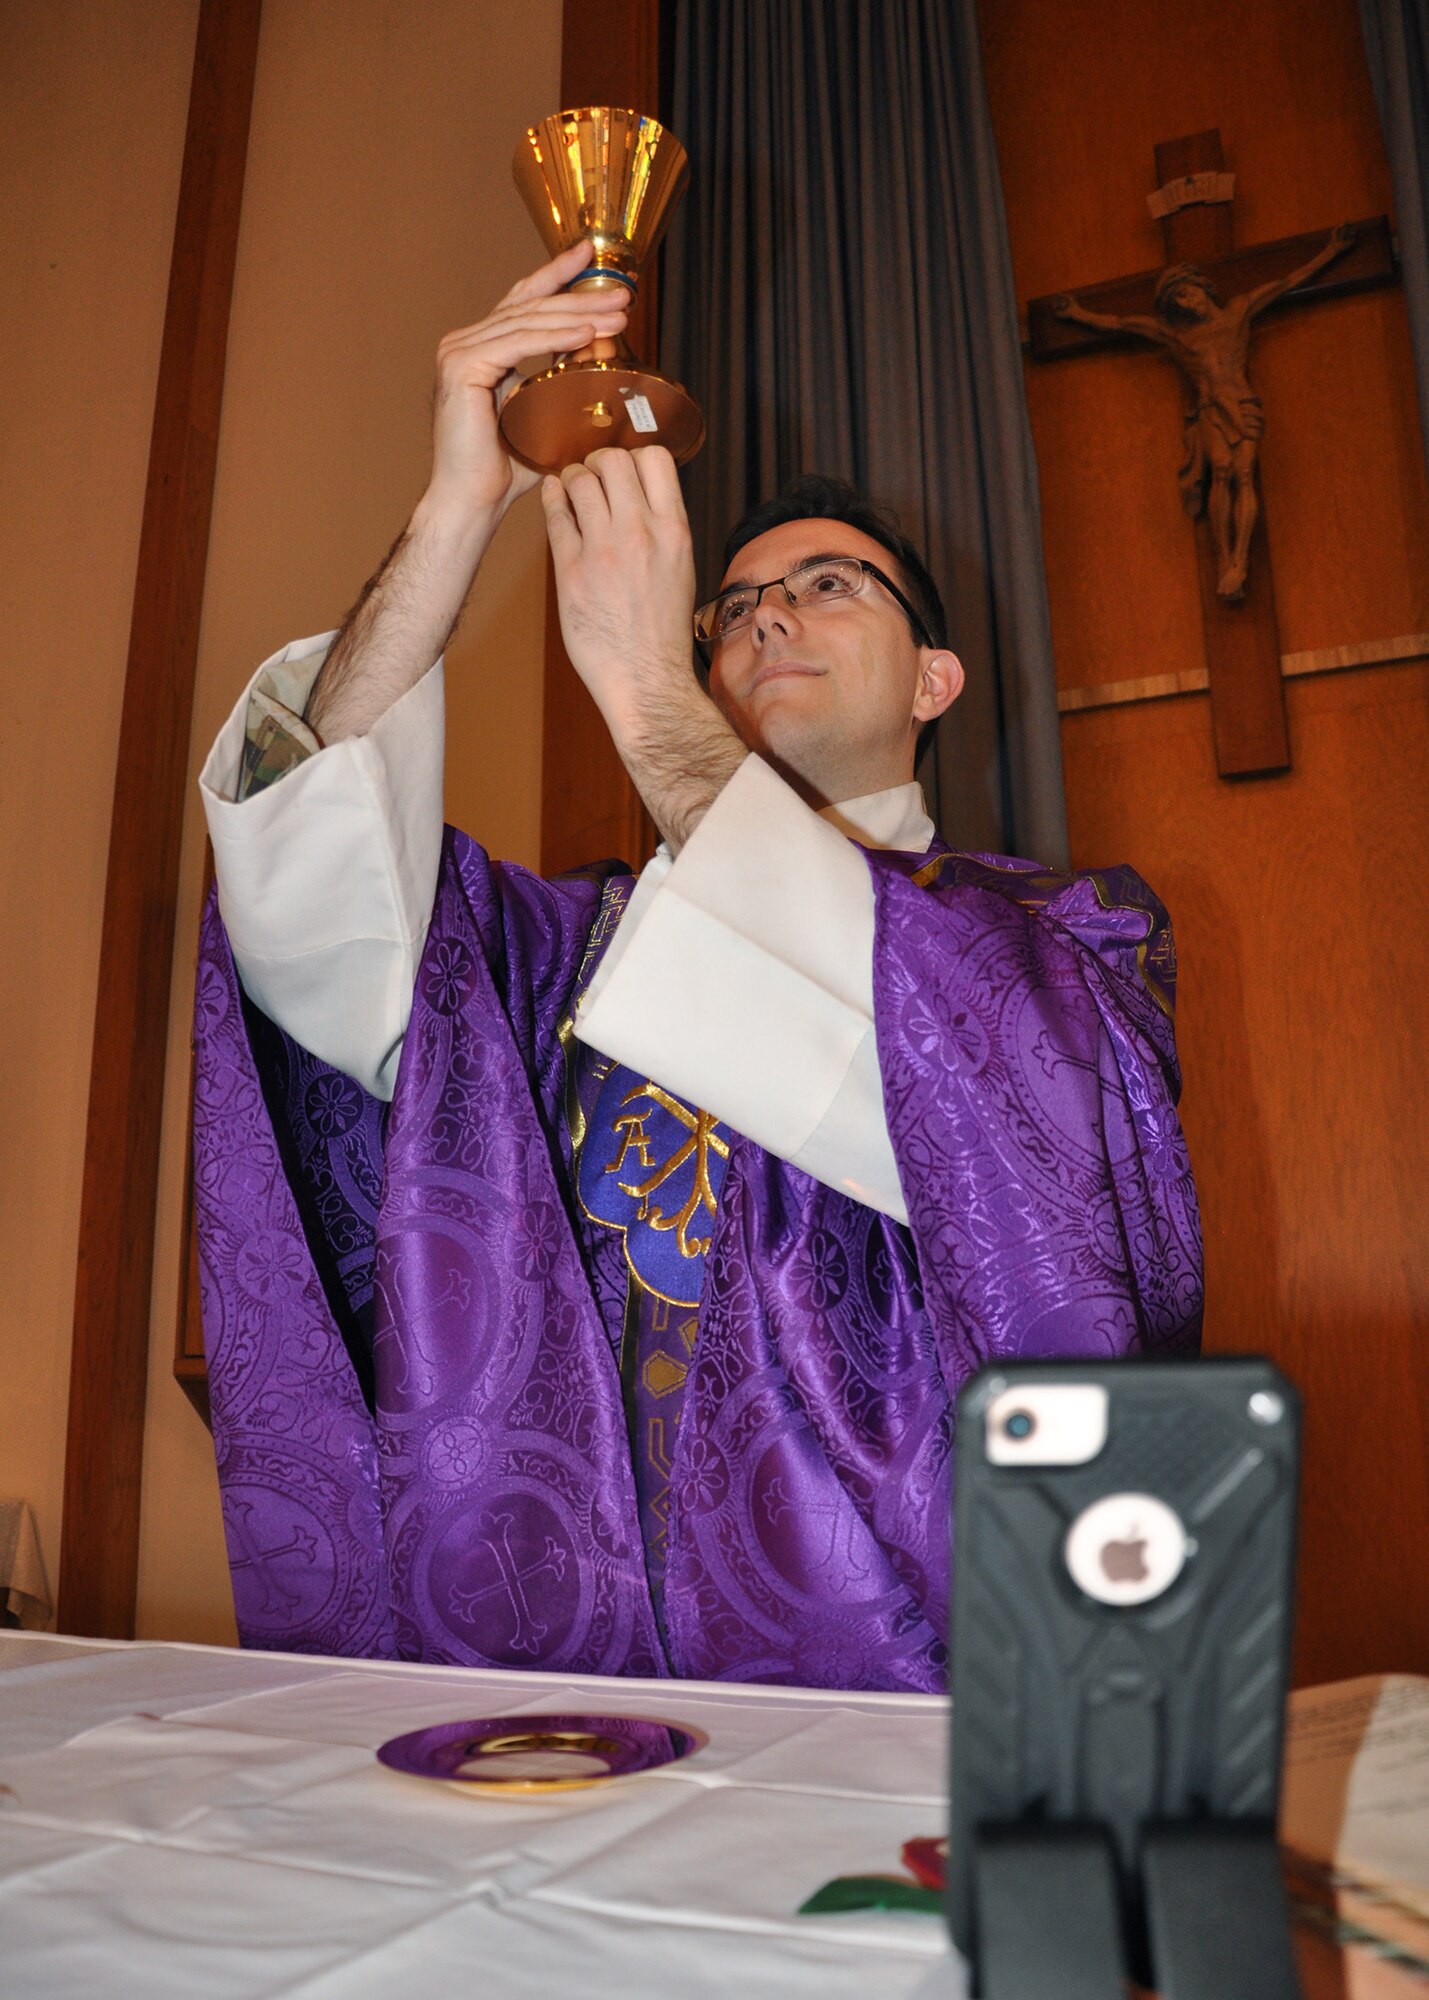 priest at altar holding up raised chalice for blessing with cell phone in foreground recording the mass for virtual reality.